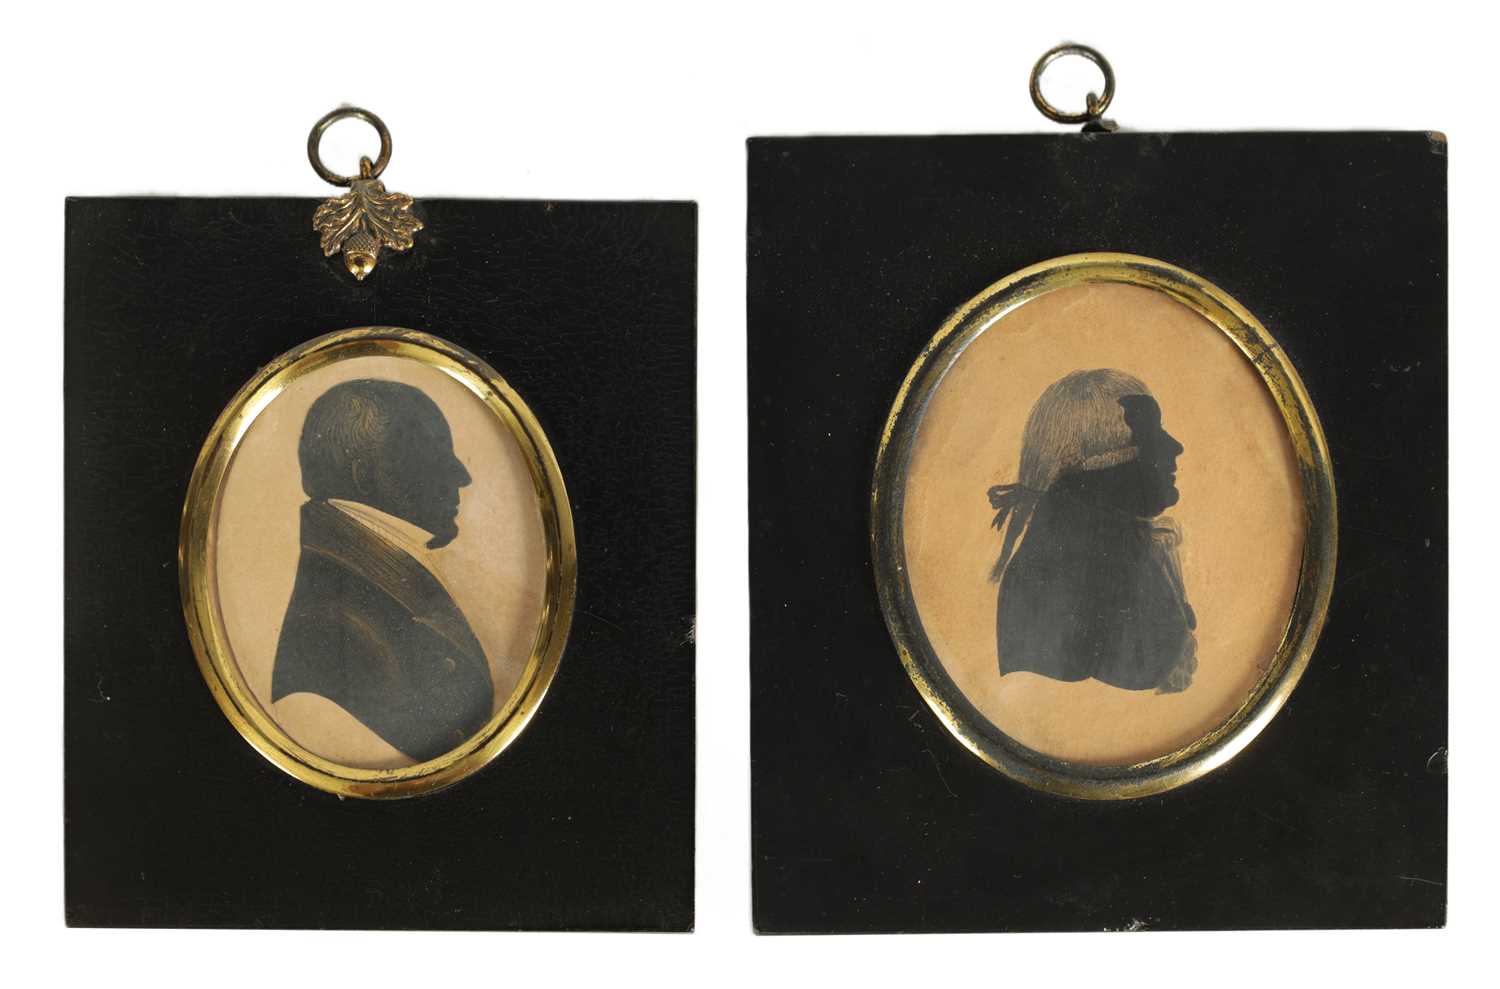 TWO LATE 18TH/EARLY 19TH CENTURY SILHOUETTE BUST PORTRAITS OF GENTLEMEN